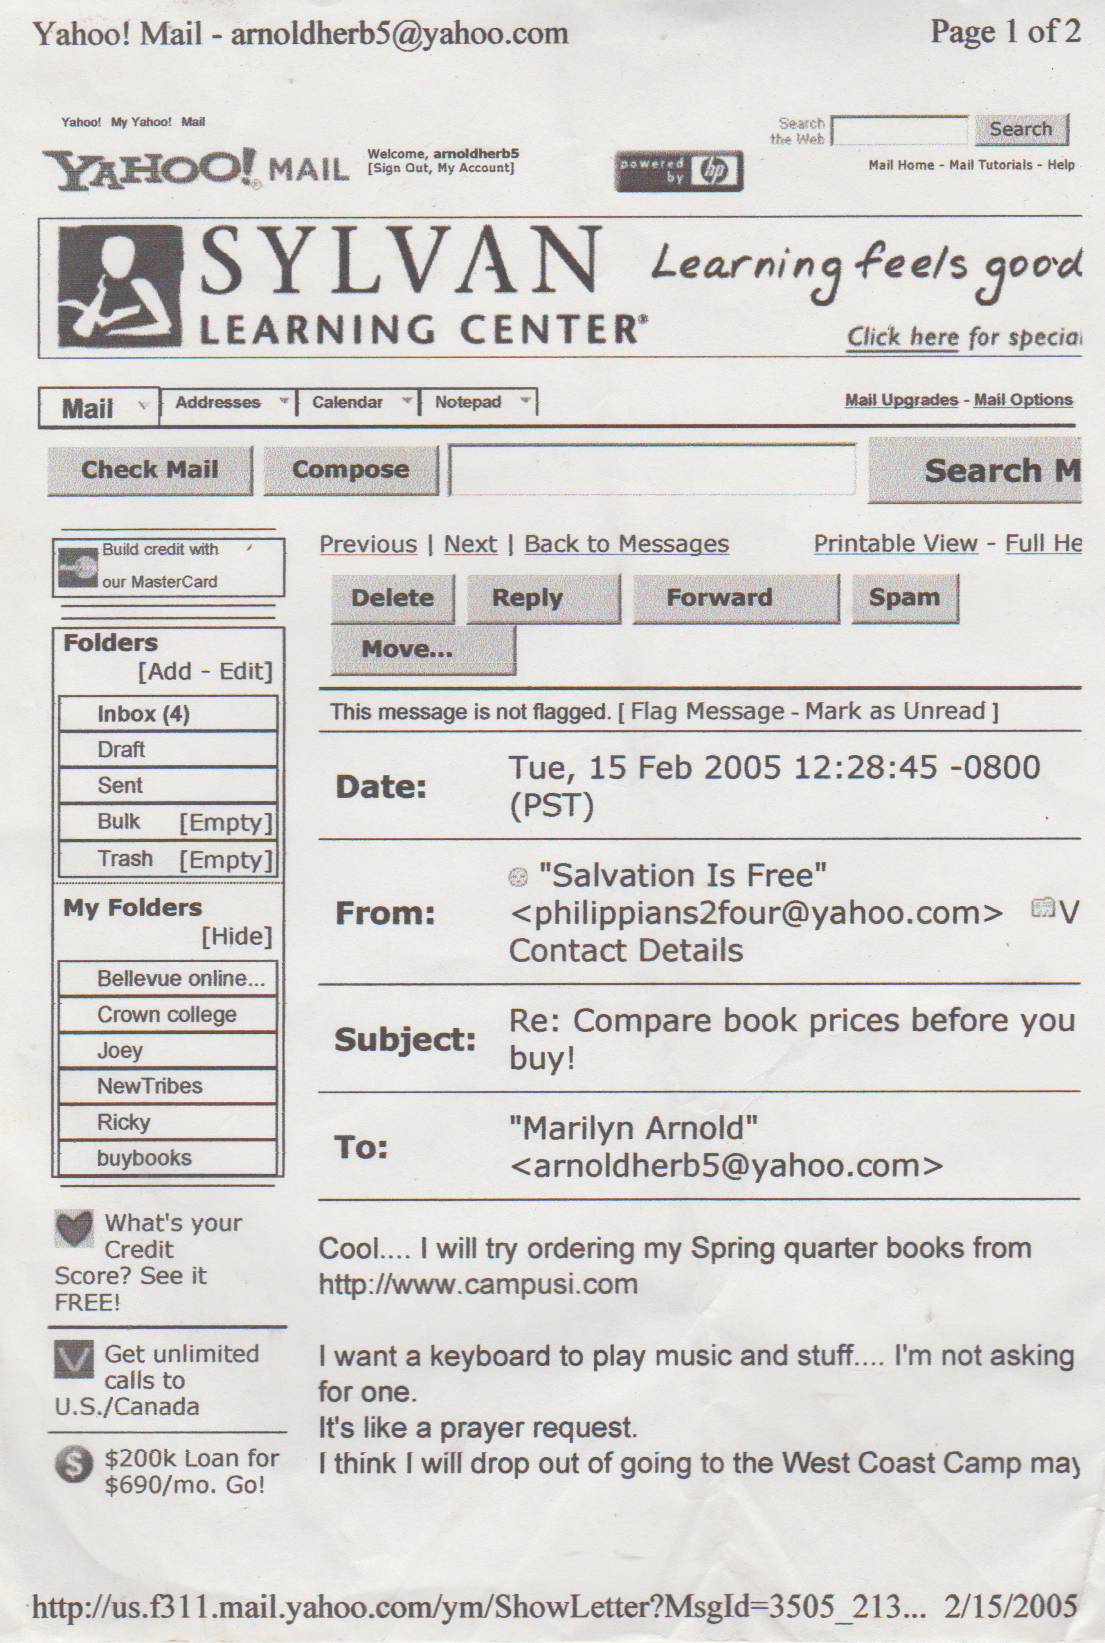 2005-02-15 - Tuesday - 12:28 PM - Joey Email to Mom regarding college books, WCC summer camp plans-1.png